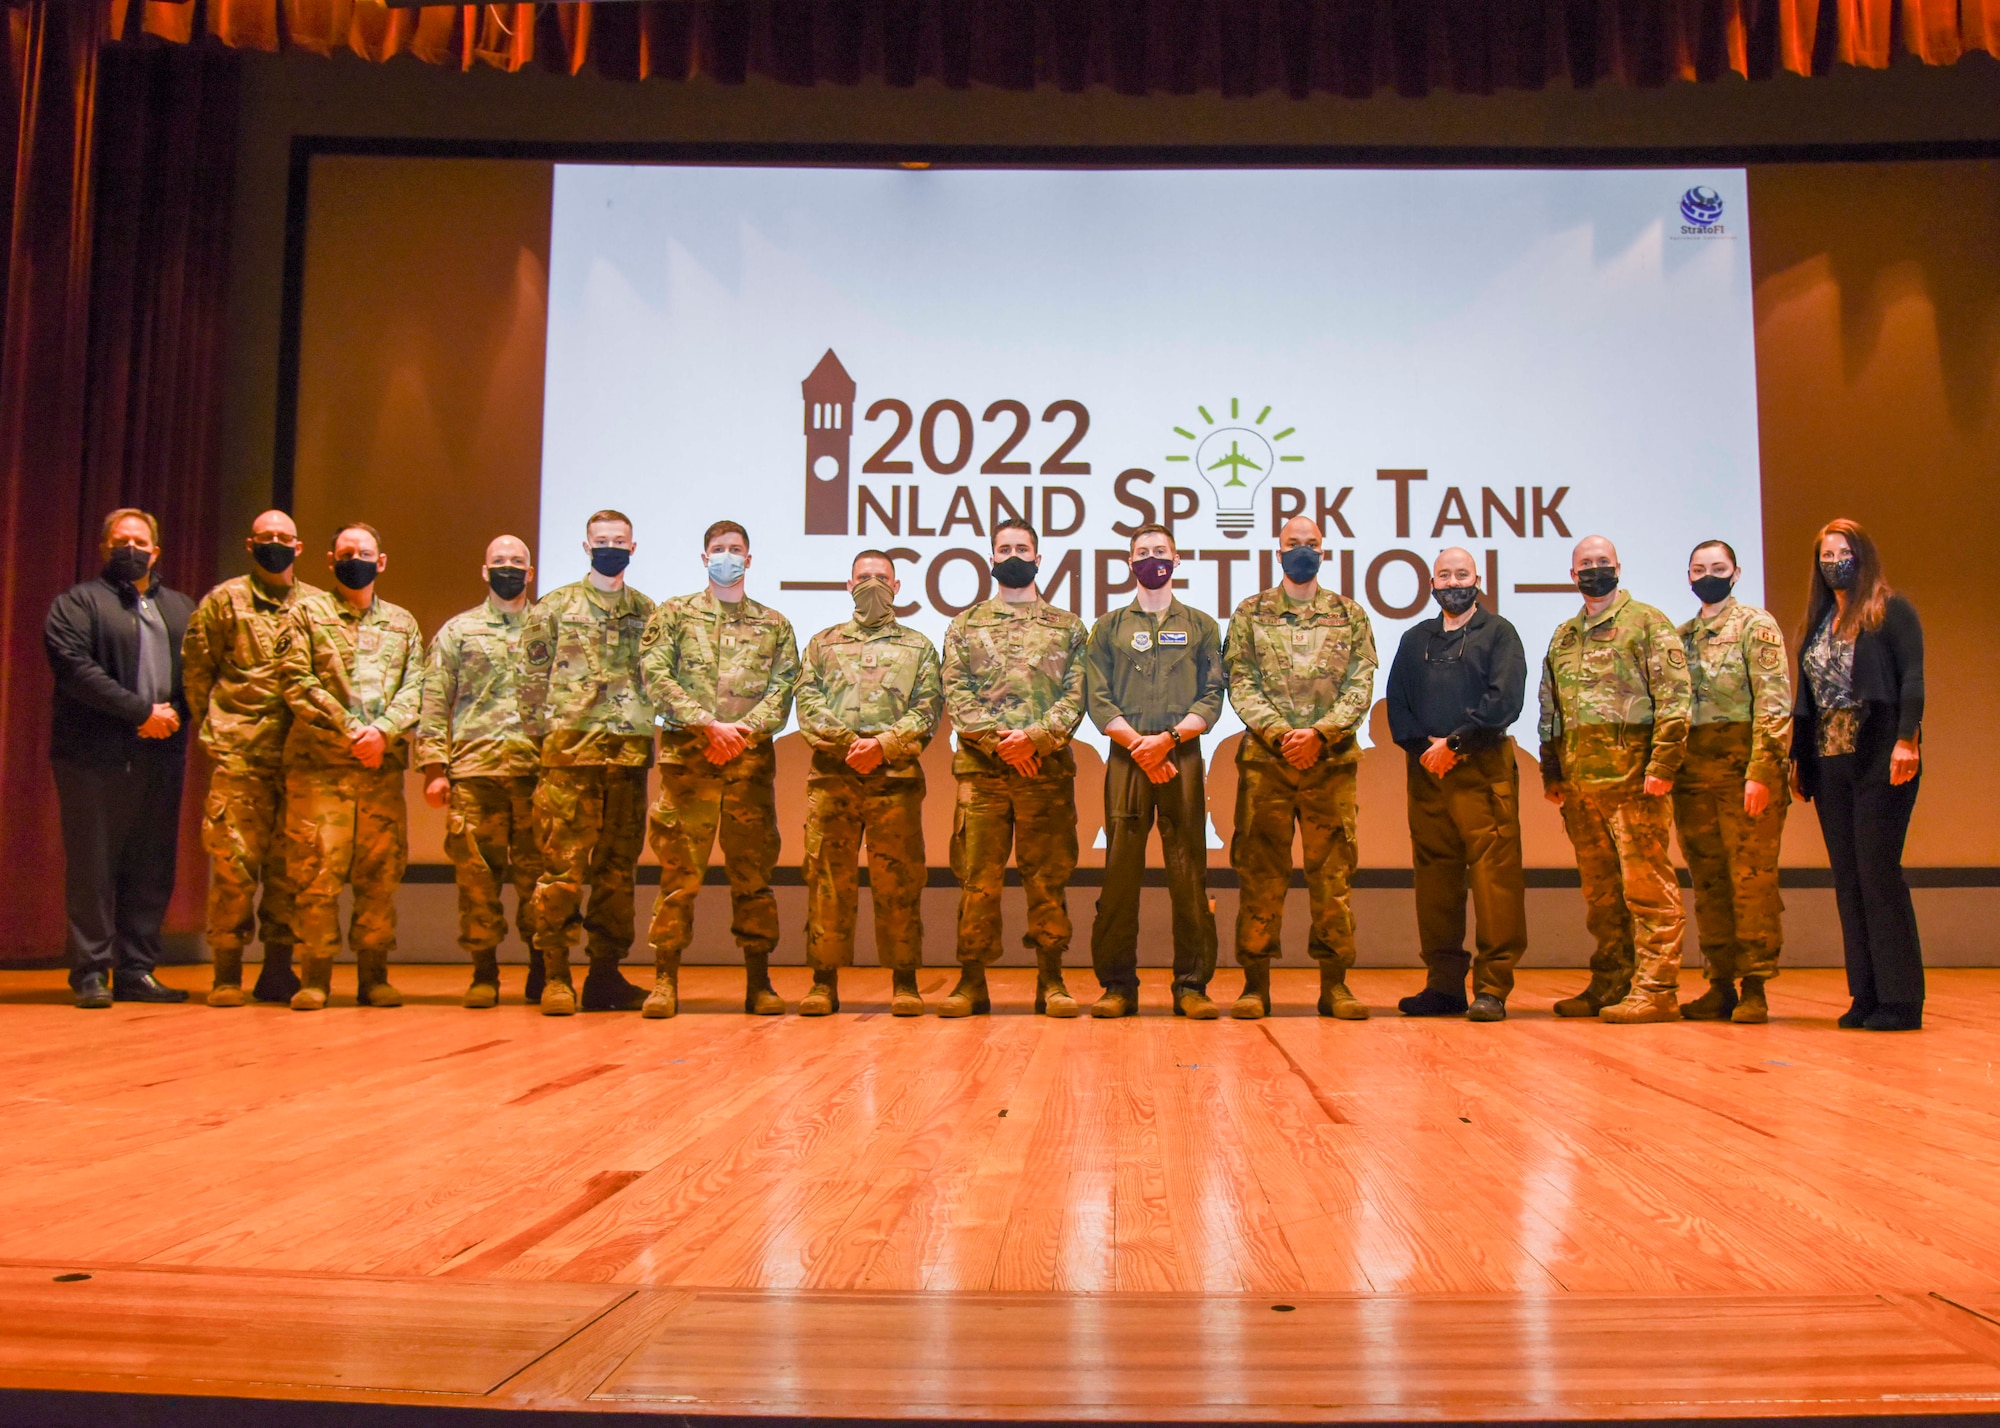 Inland Northwest Spark Tank Competition contestants, judges, and hosts pose for a group photo.